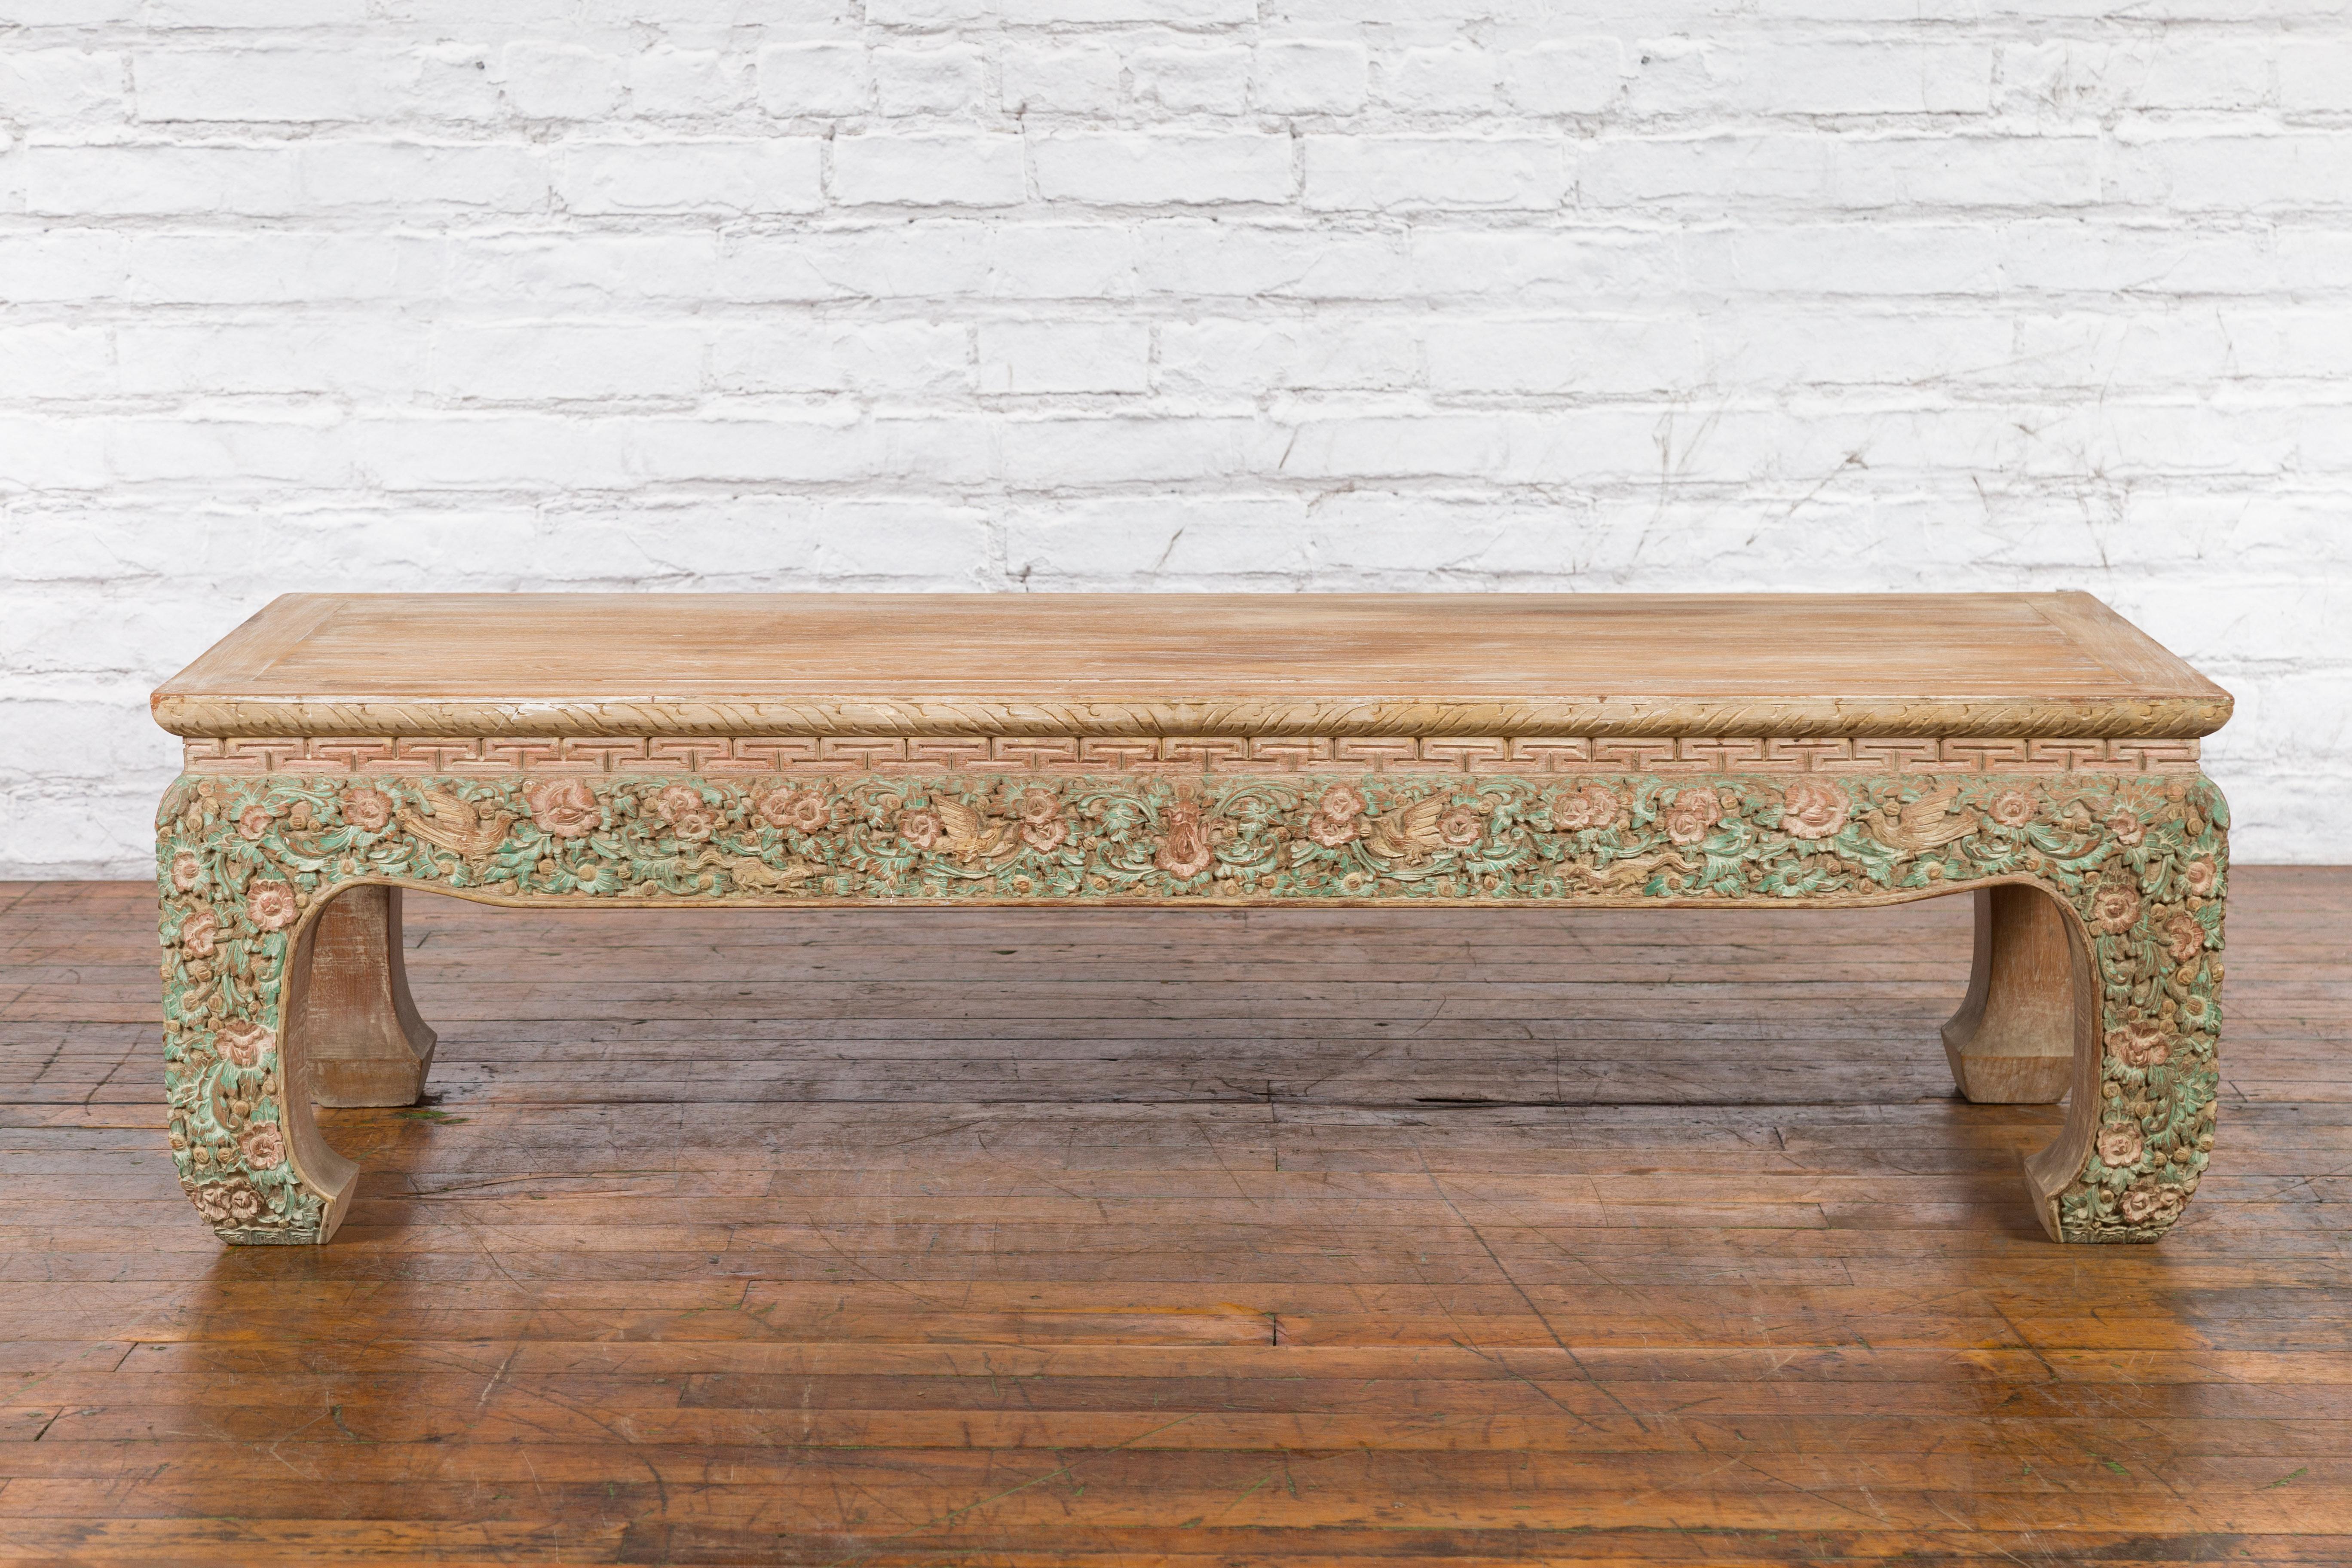 A Thai contemporary teak wood coffee table with carved floral motifs and painted accents. Created in Thailand, this teak wood coffee features a rectangular waisted top with central board, sitting above an apron carved with delicate meander motifs.